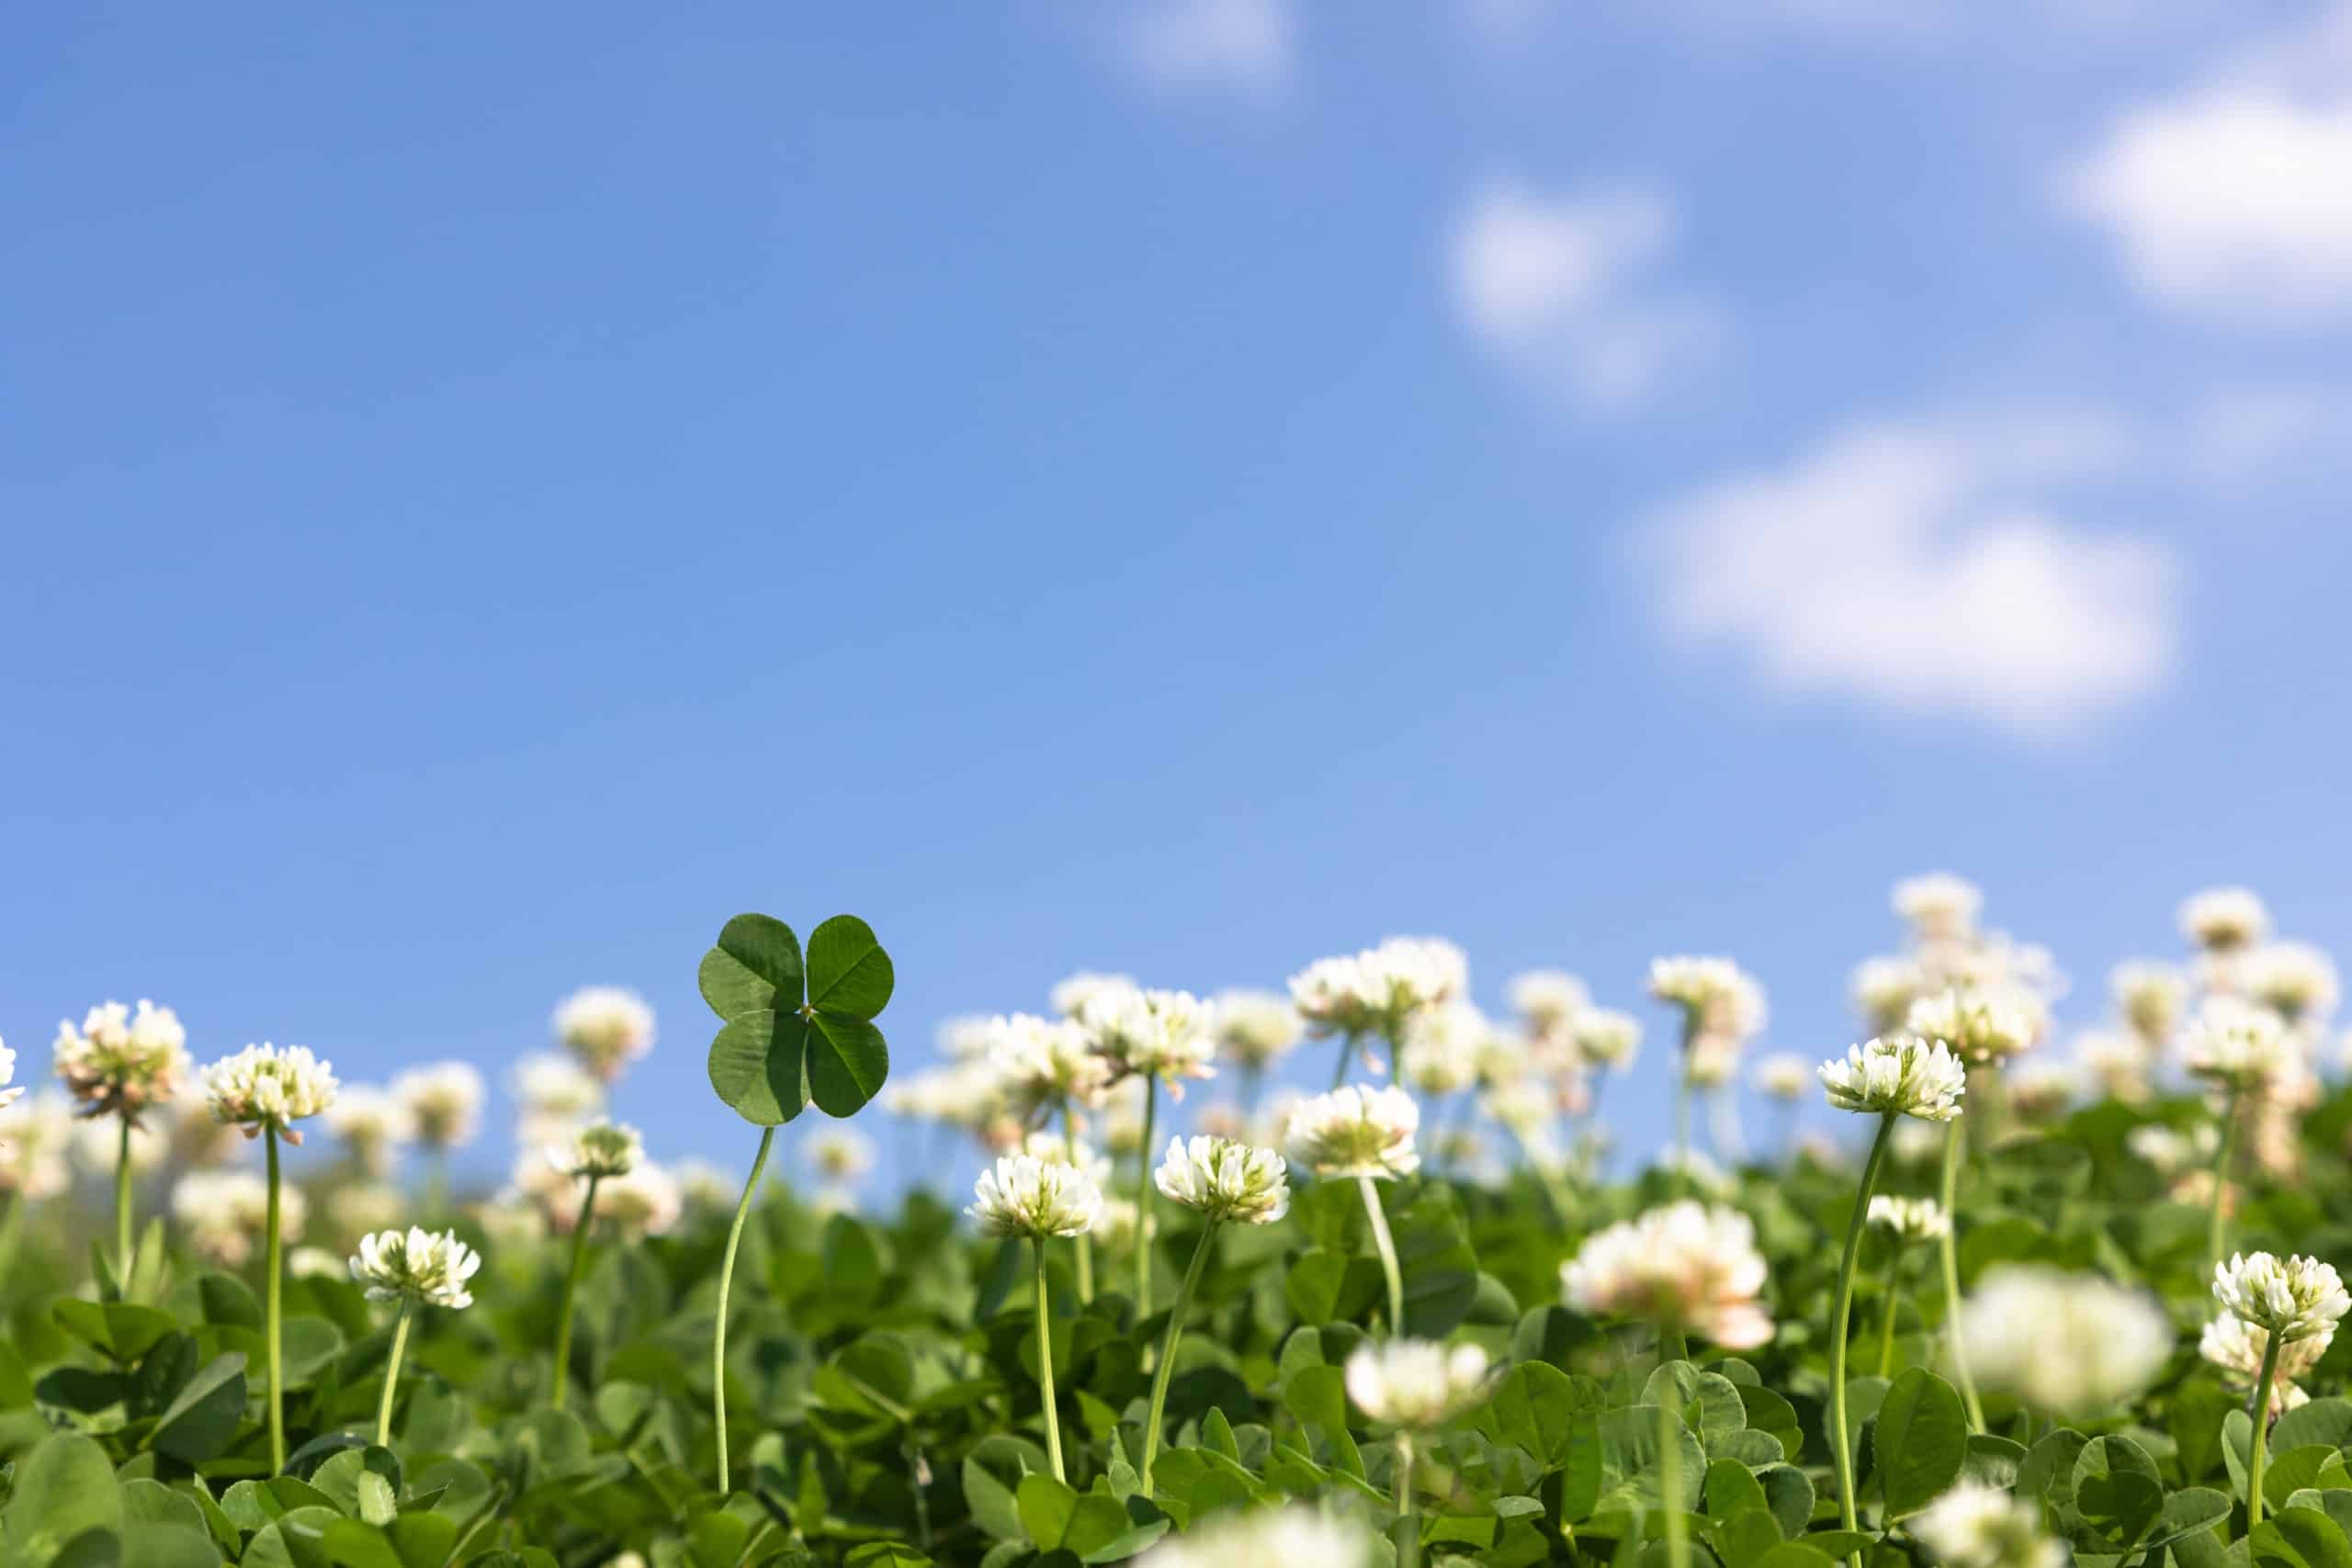 Clover flowers under the blue sky with some clouds